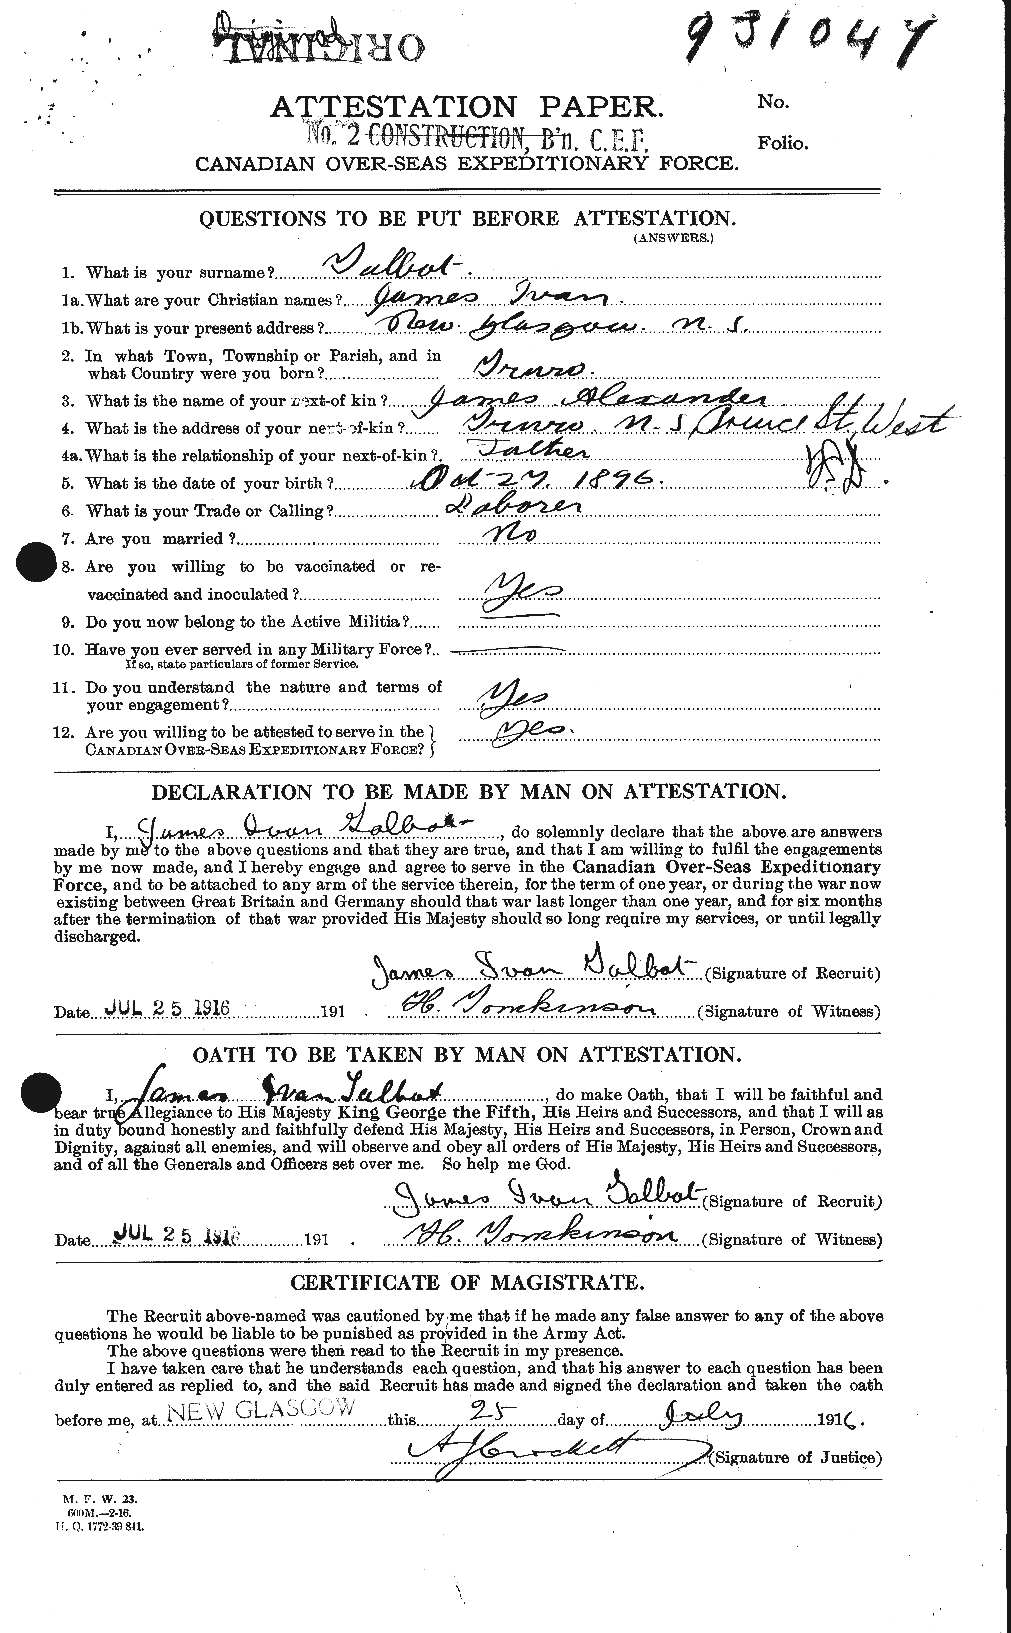 Personnel Records of the First World War - CEF 126867a